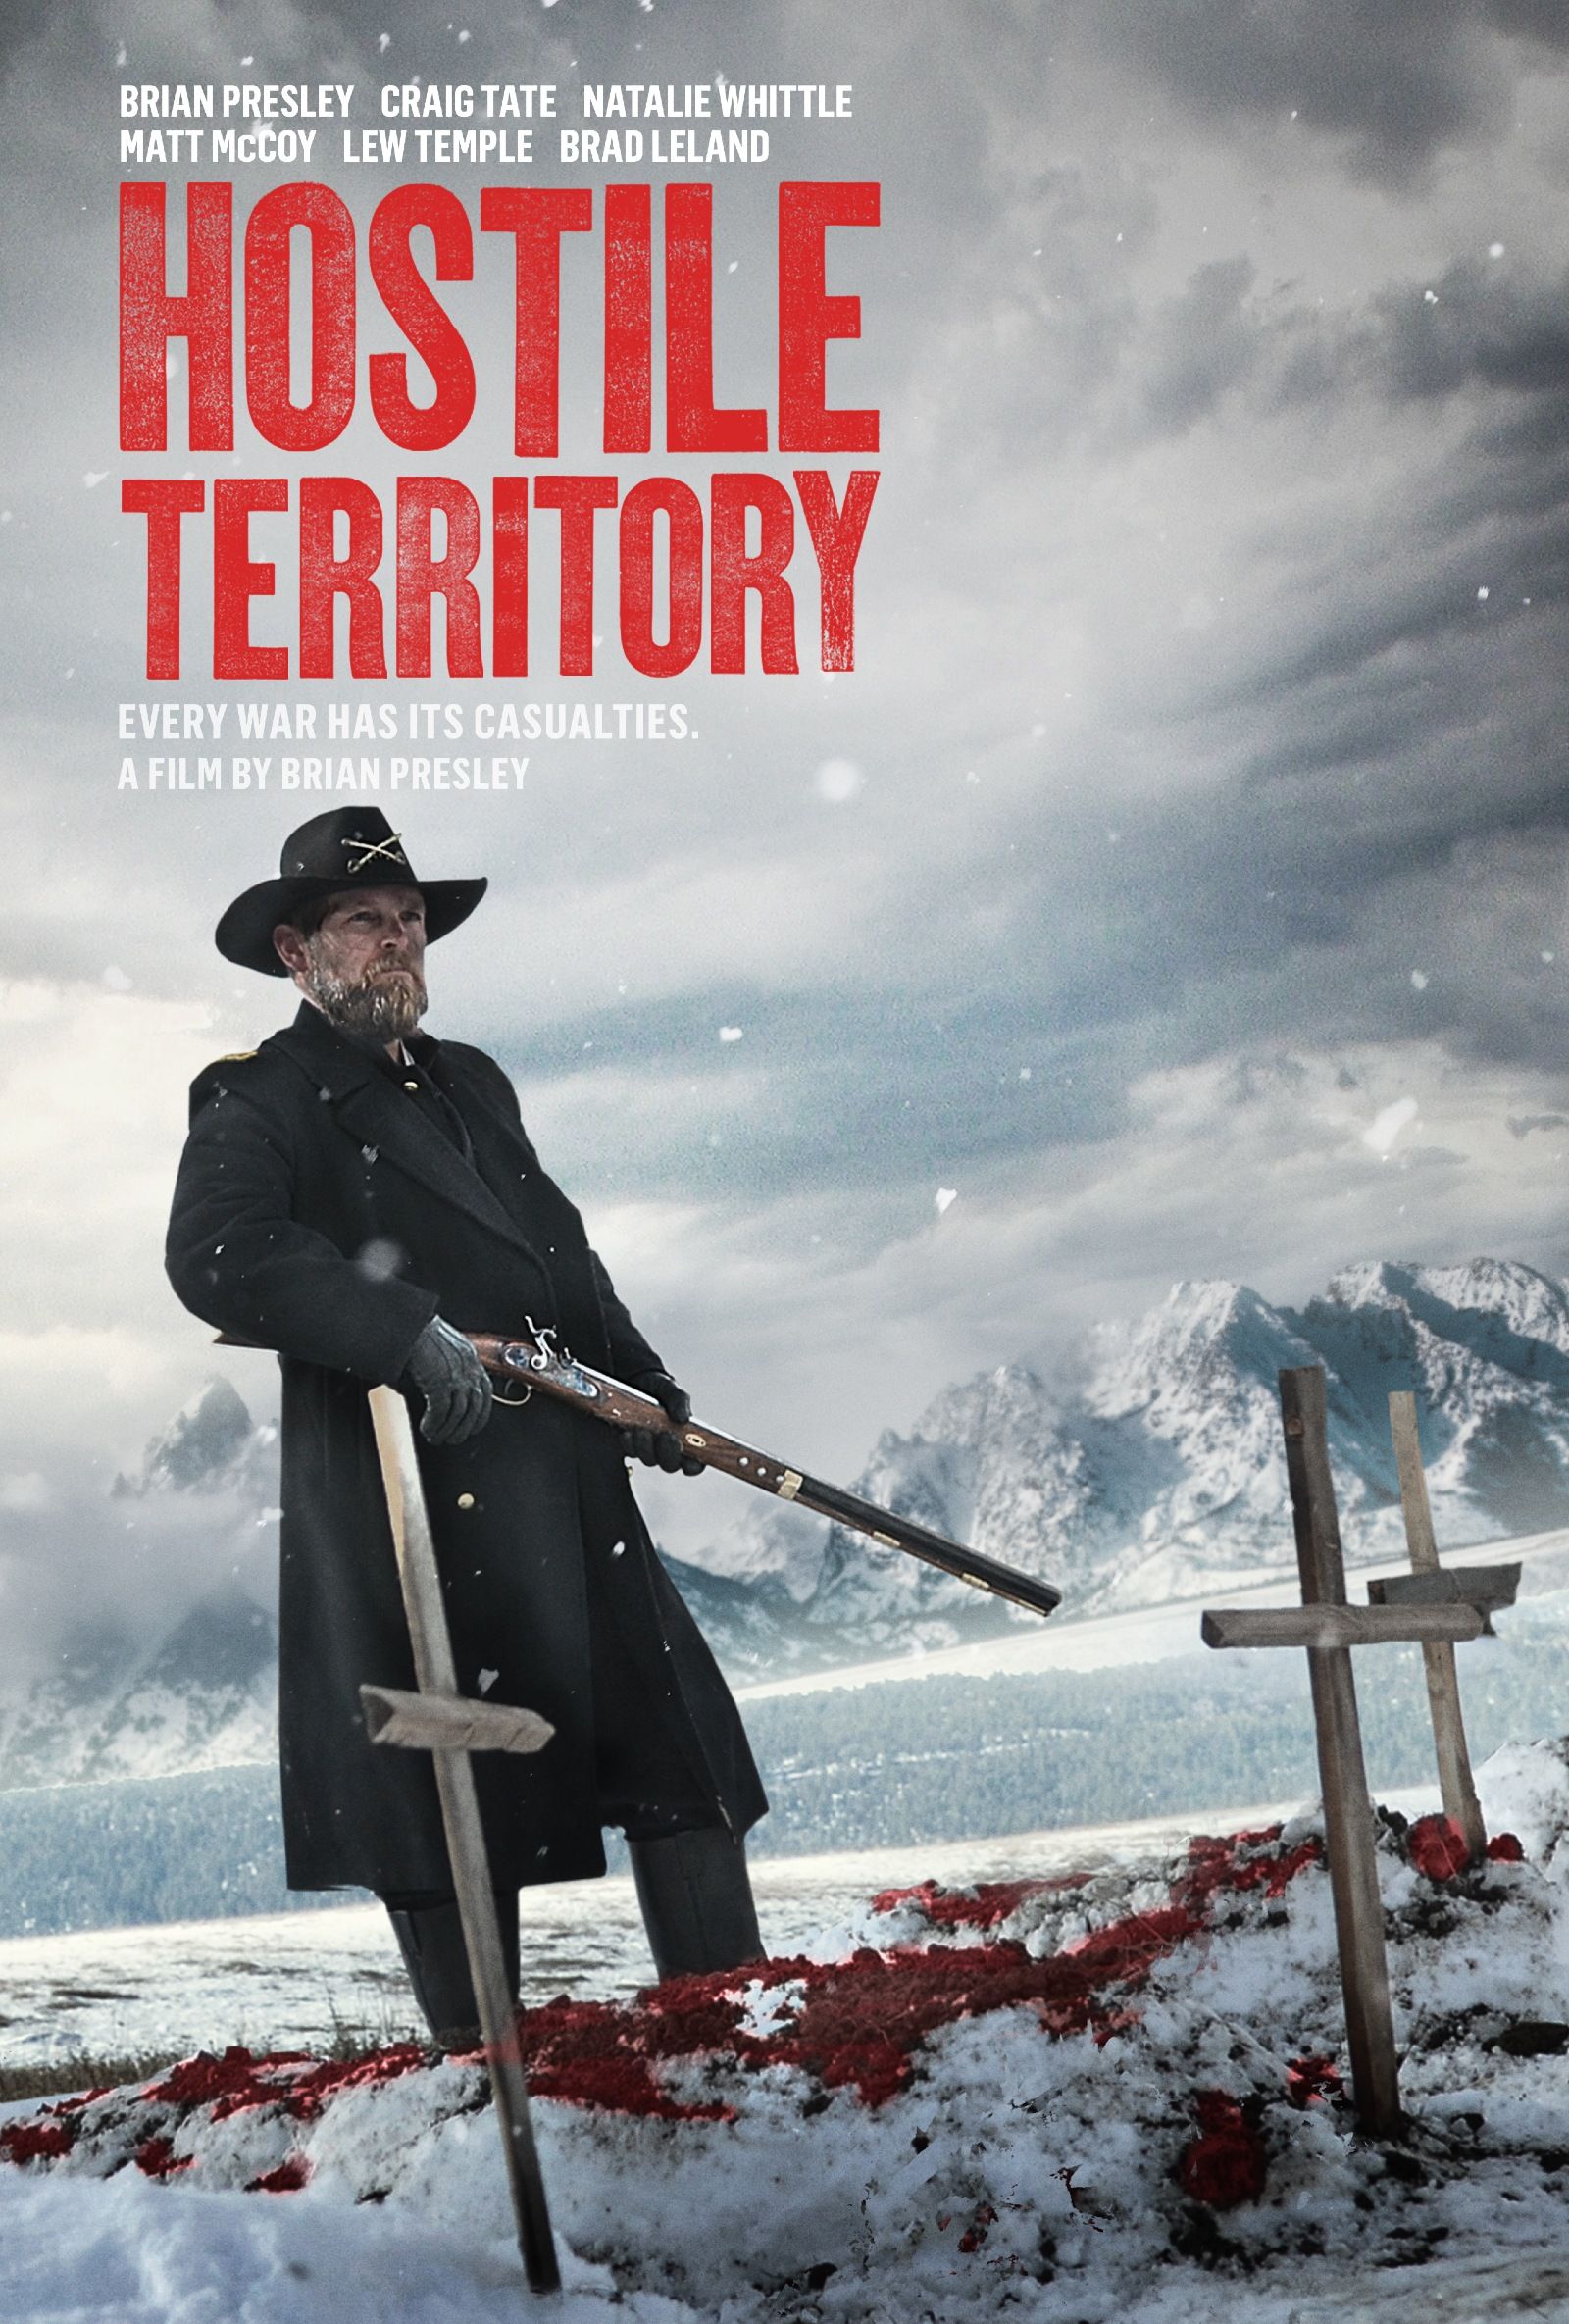 Hostile Territory Trailer & Poster Revealed [EXCLUSIVE]